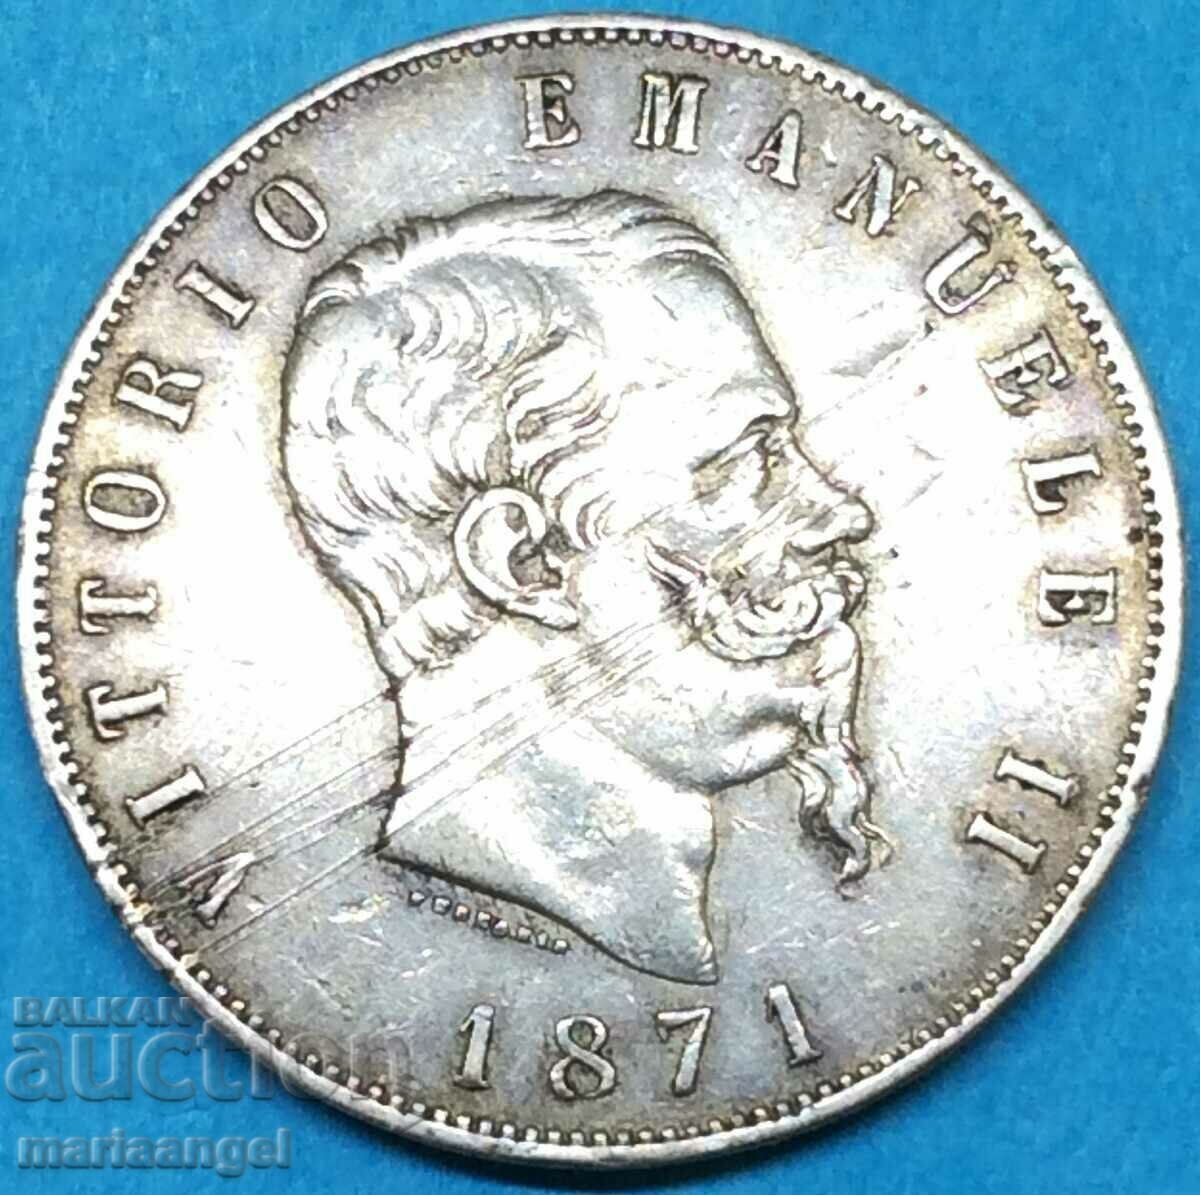 5 lire 1871 Italy Thaler 25g 37mm silver